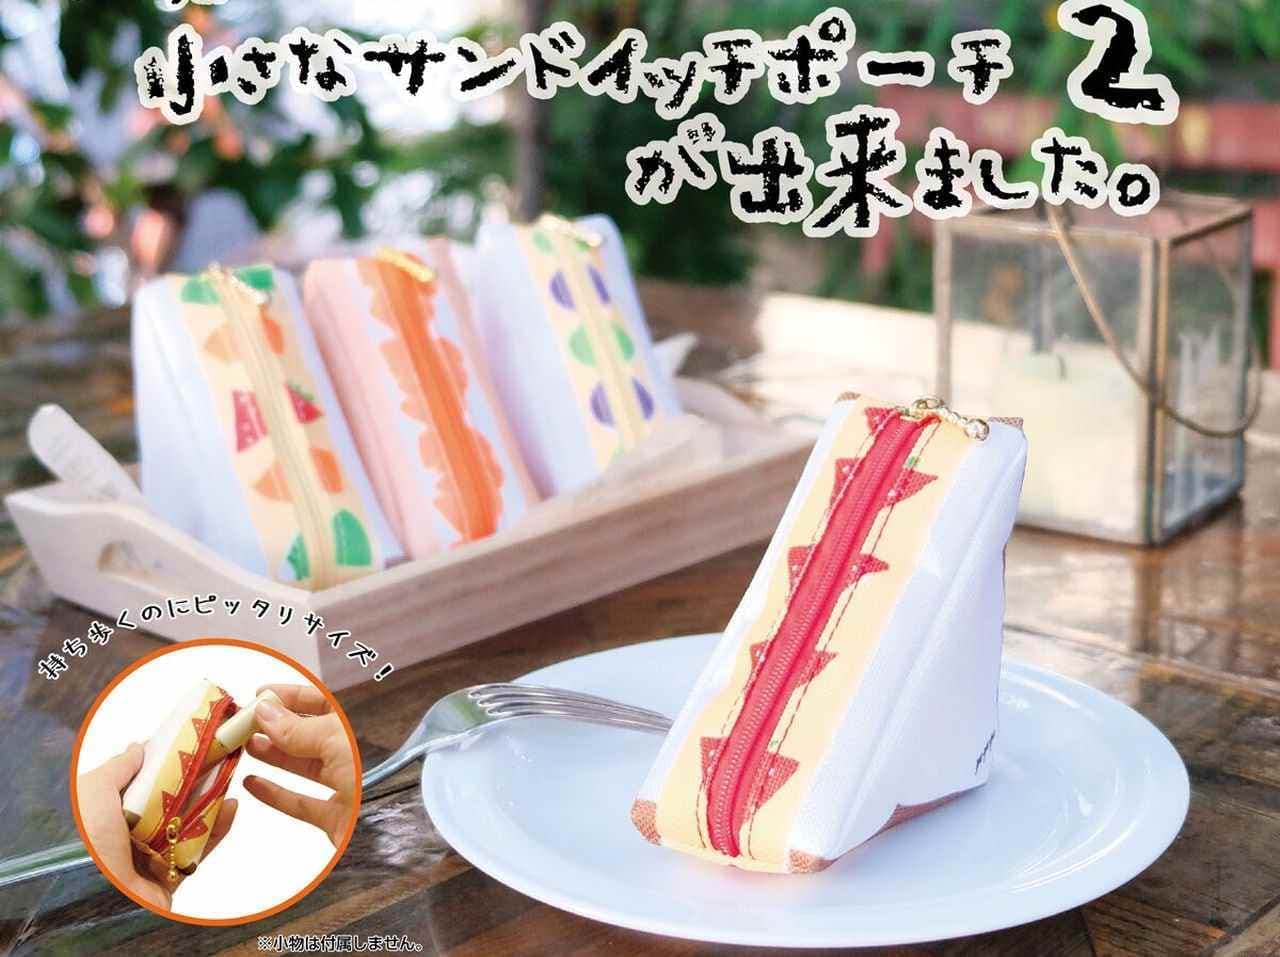 Capsule toy "A small sandwich pouch is ready. 2"